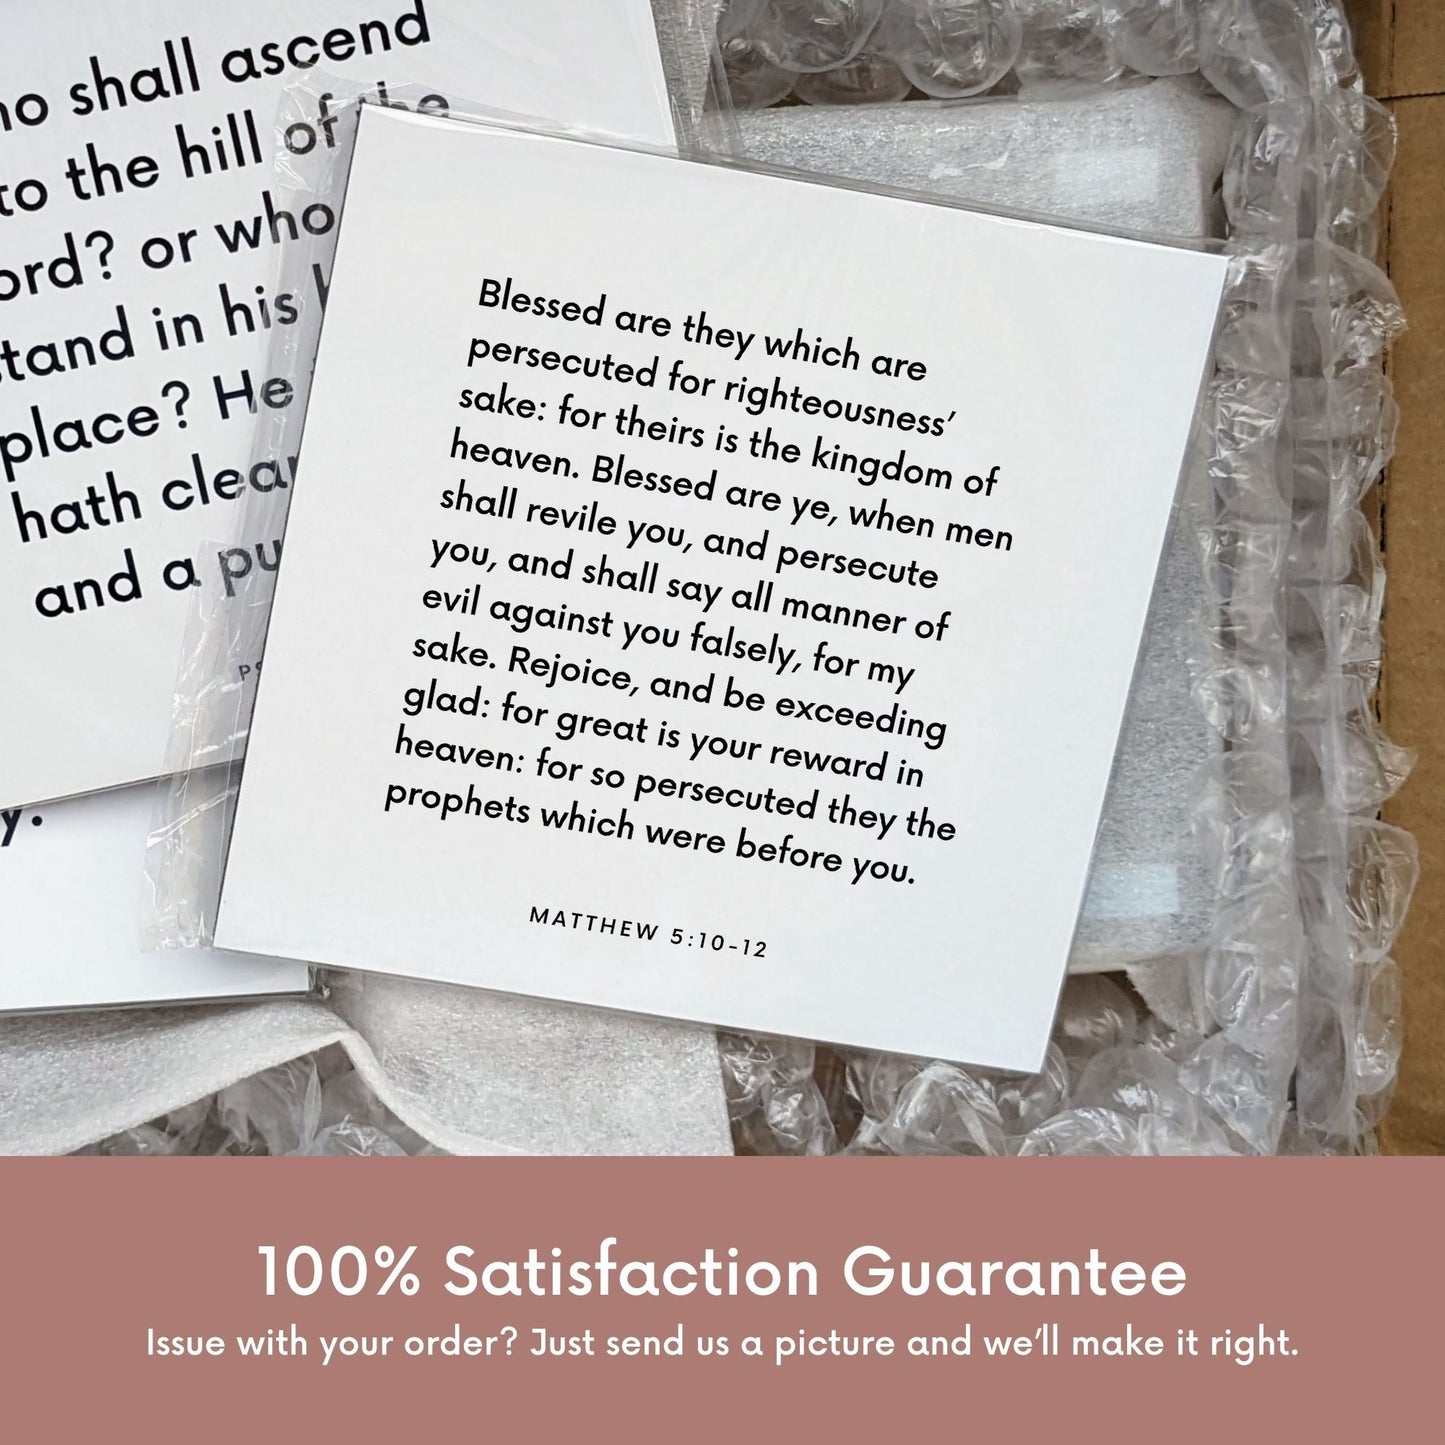 Shipping materials for scripture tile of Matthew 5:10-12 - "So persecuted they the prophets which were before you"